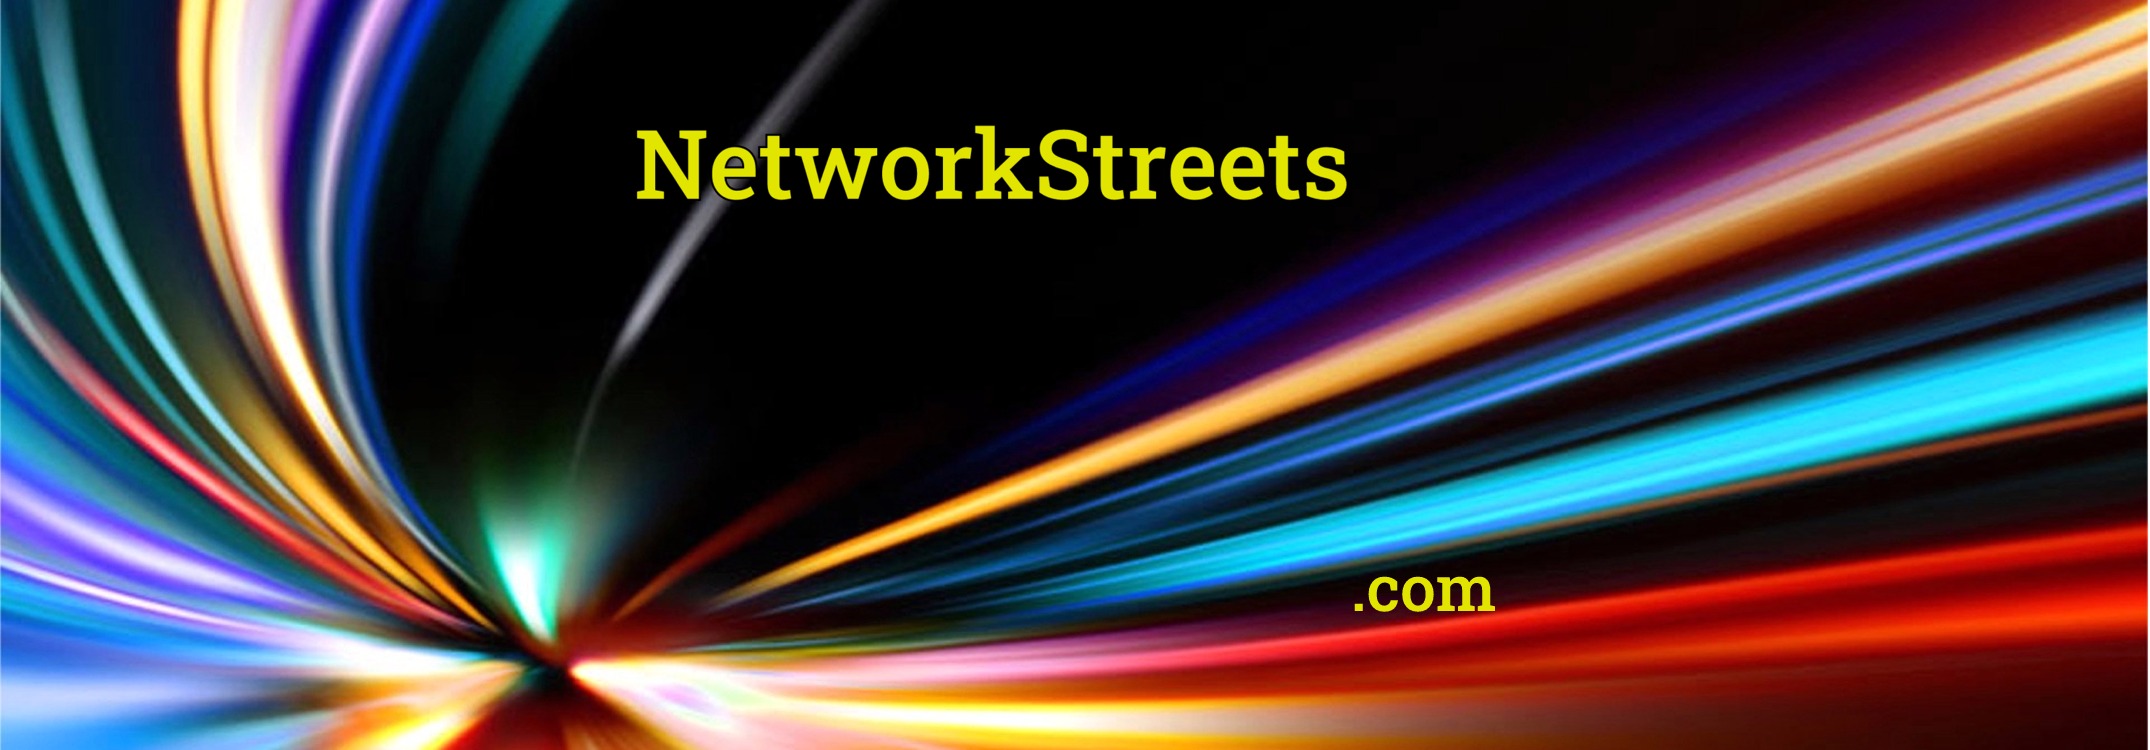 Network Streets